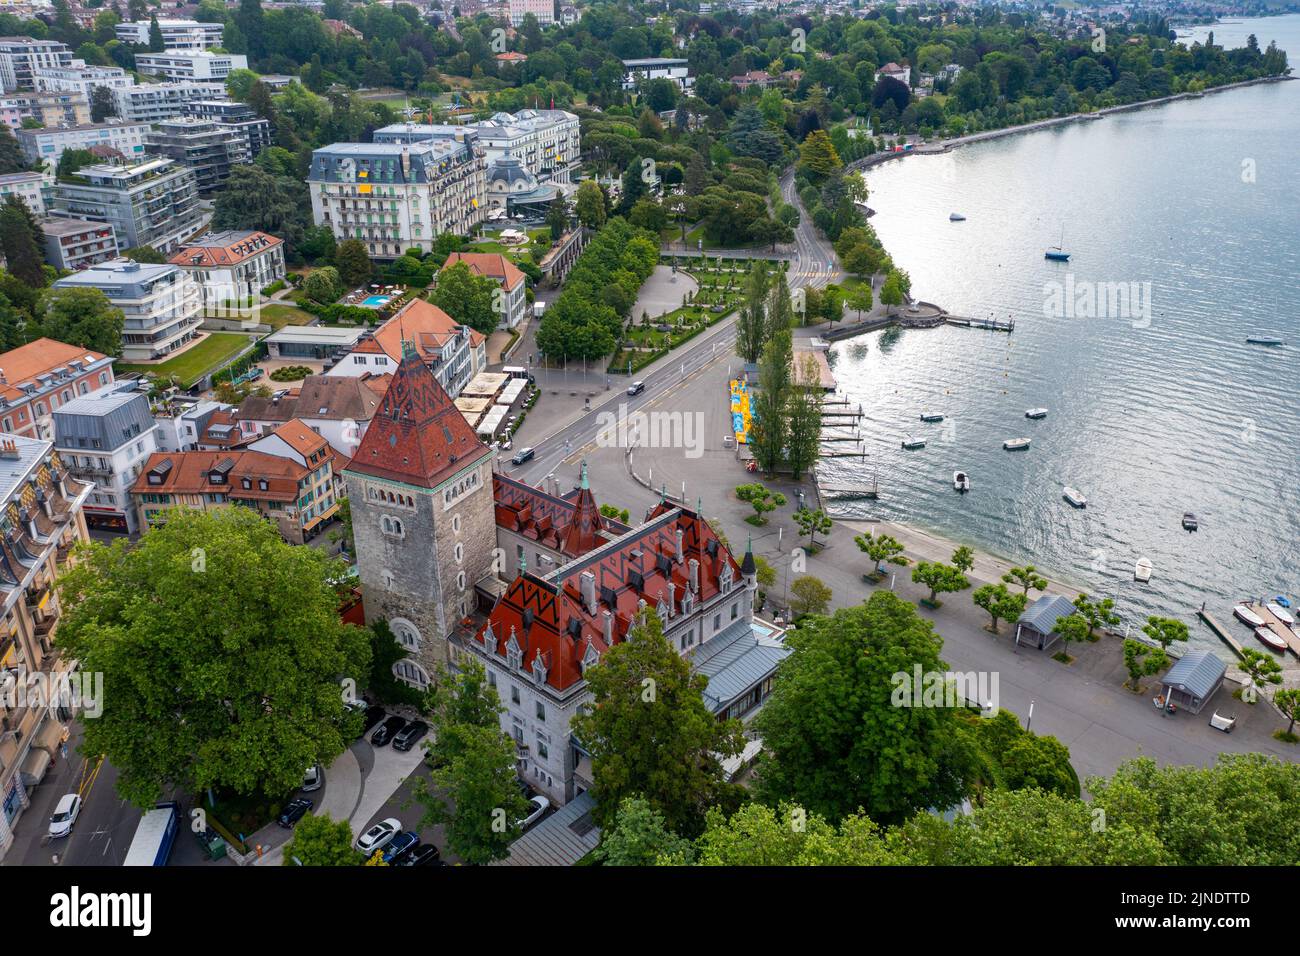 Château d'Ouchy, Lausanne, Switzerland Stock Photo